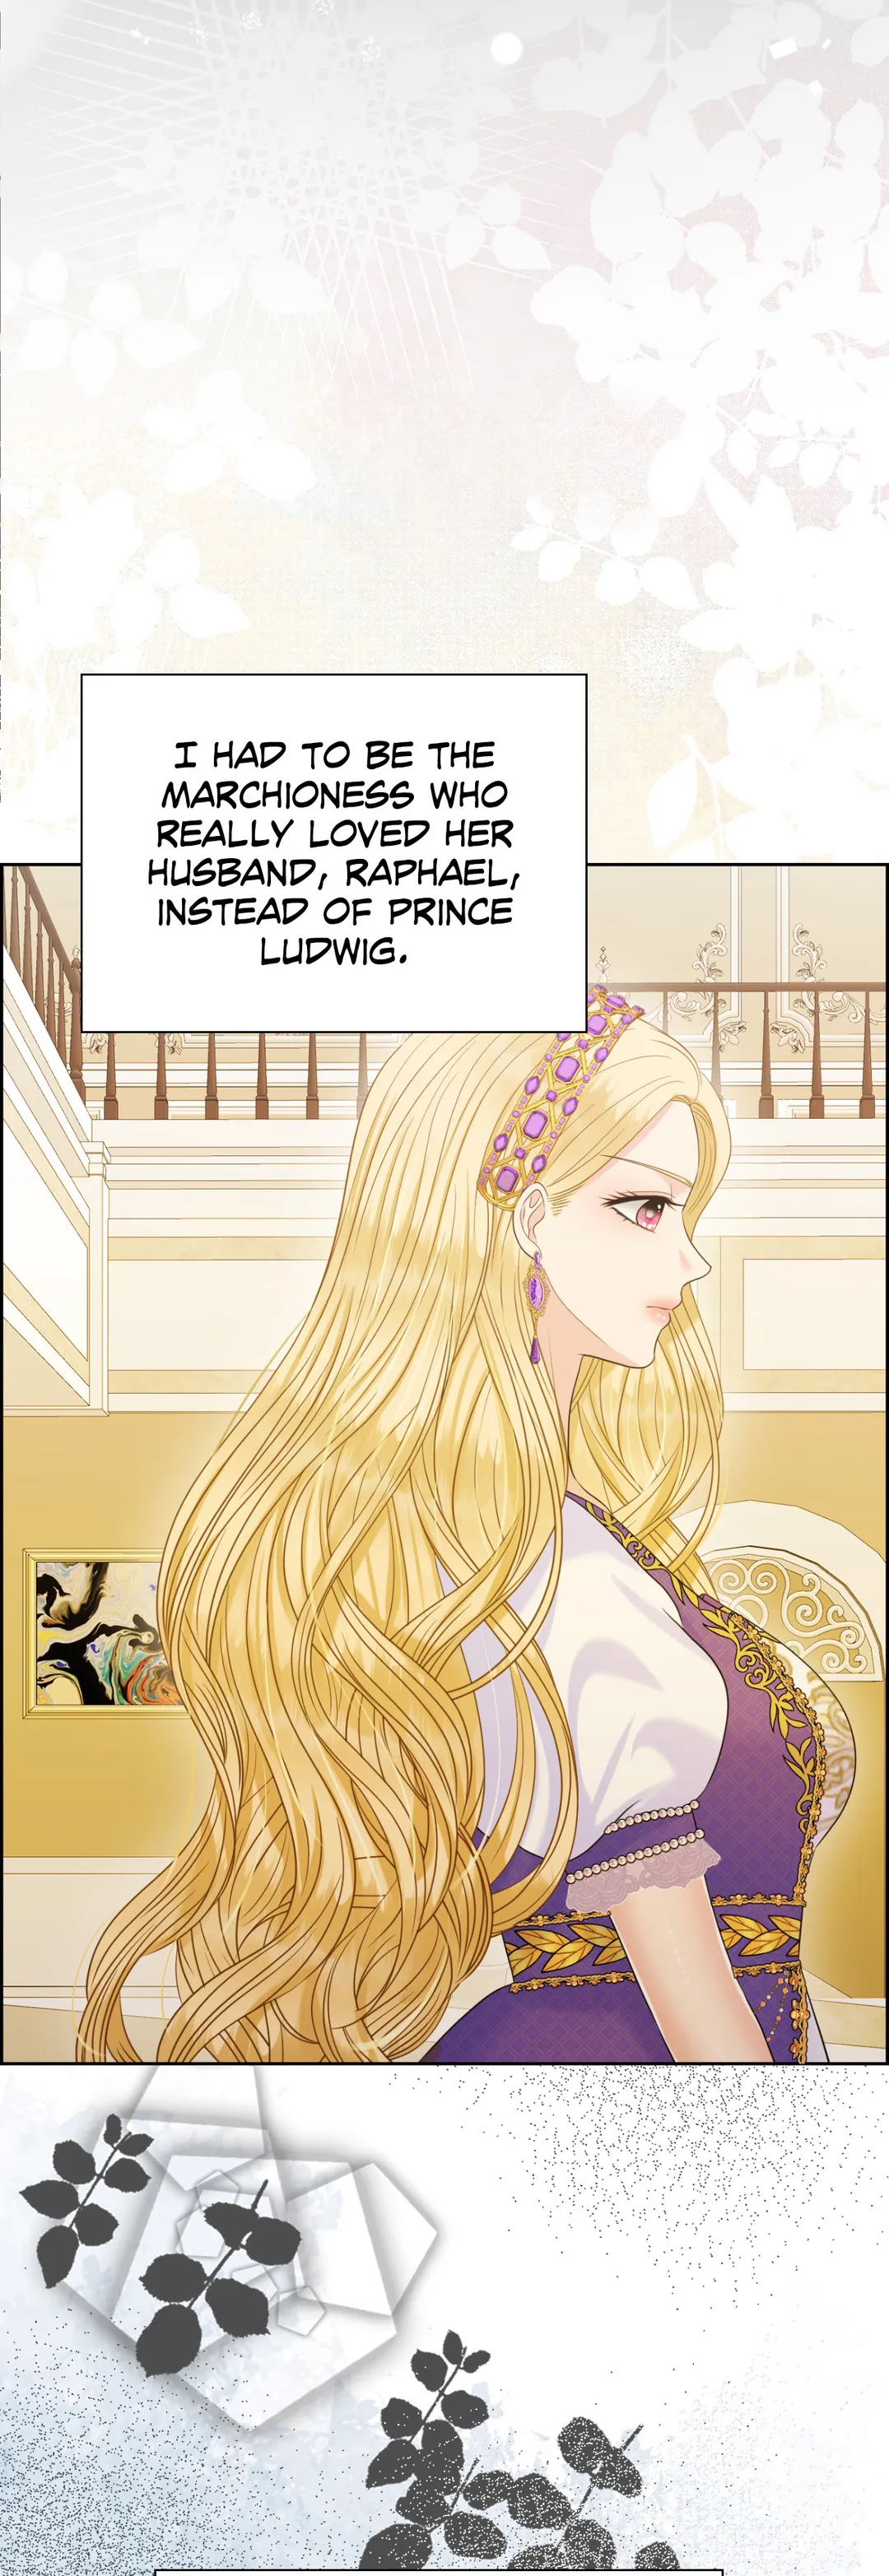 Royal Redemption chapter 28